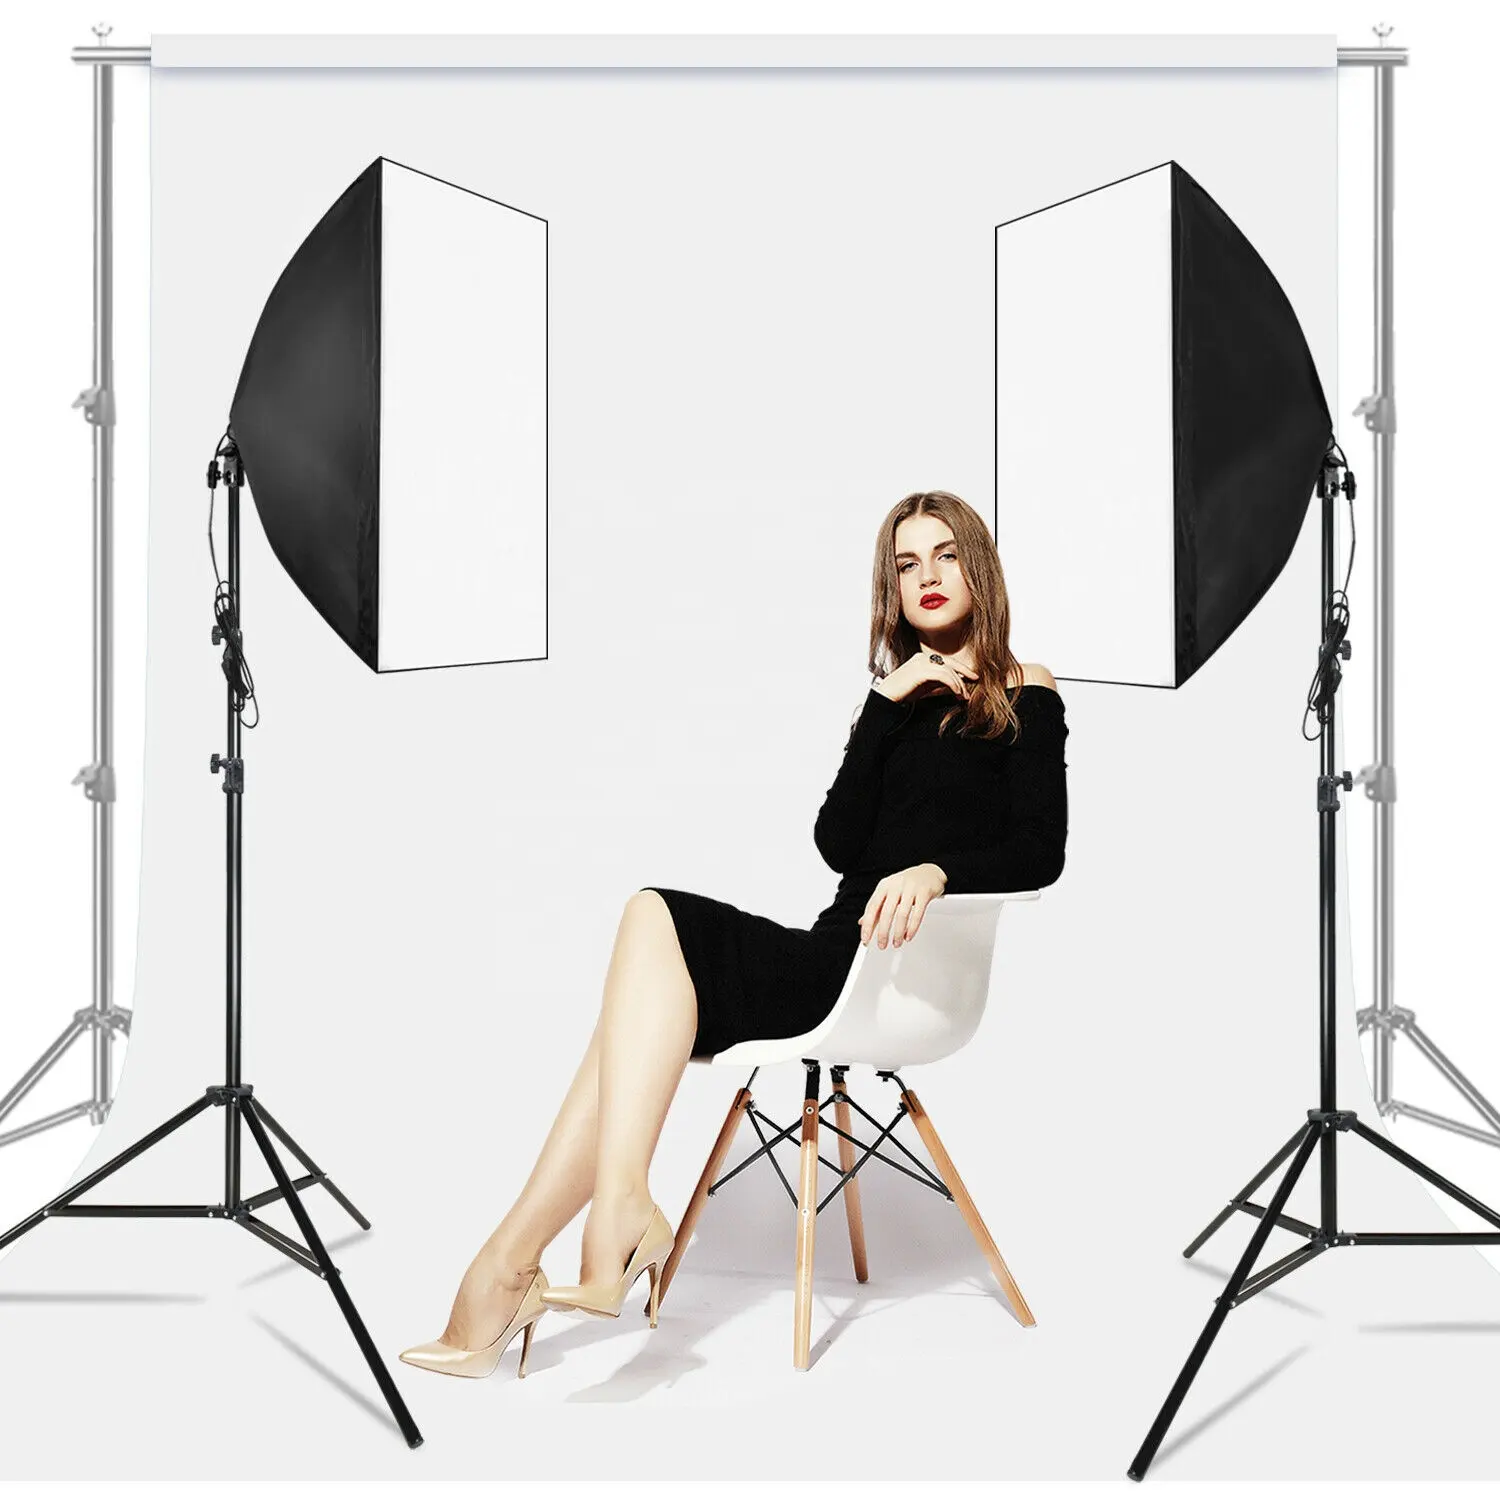 Photo Studio 50x70cm 20" X 28" Photography Continuous Light Box Softbox With LED Bulbs Socket For Photography Lighting